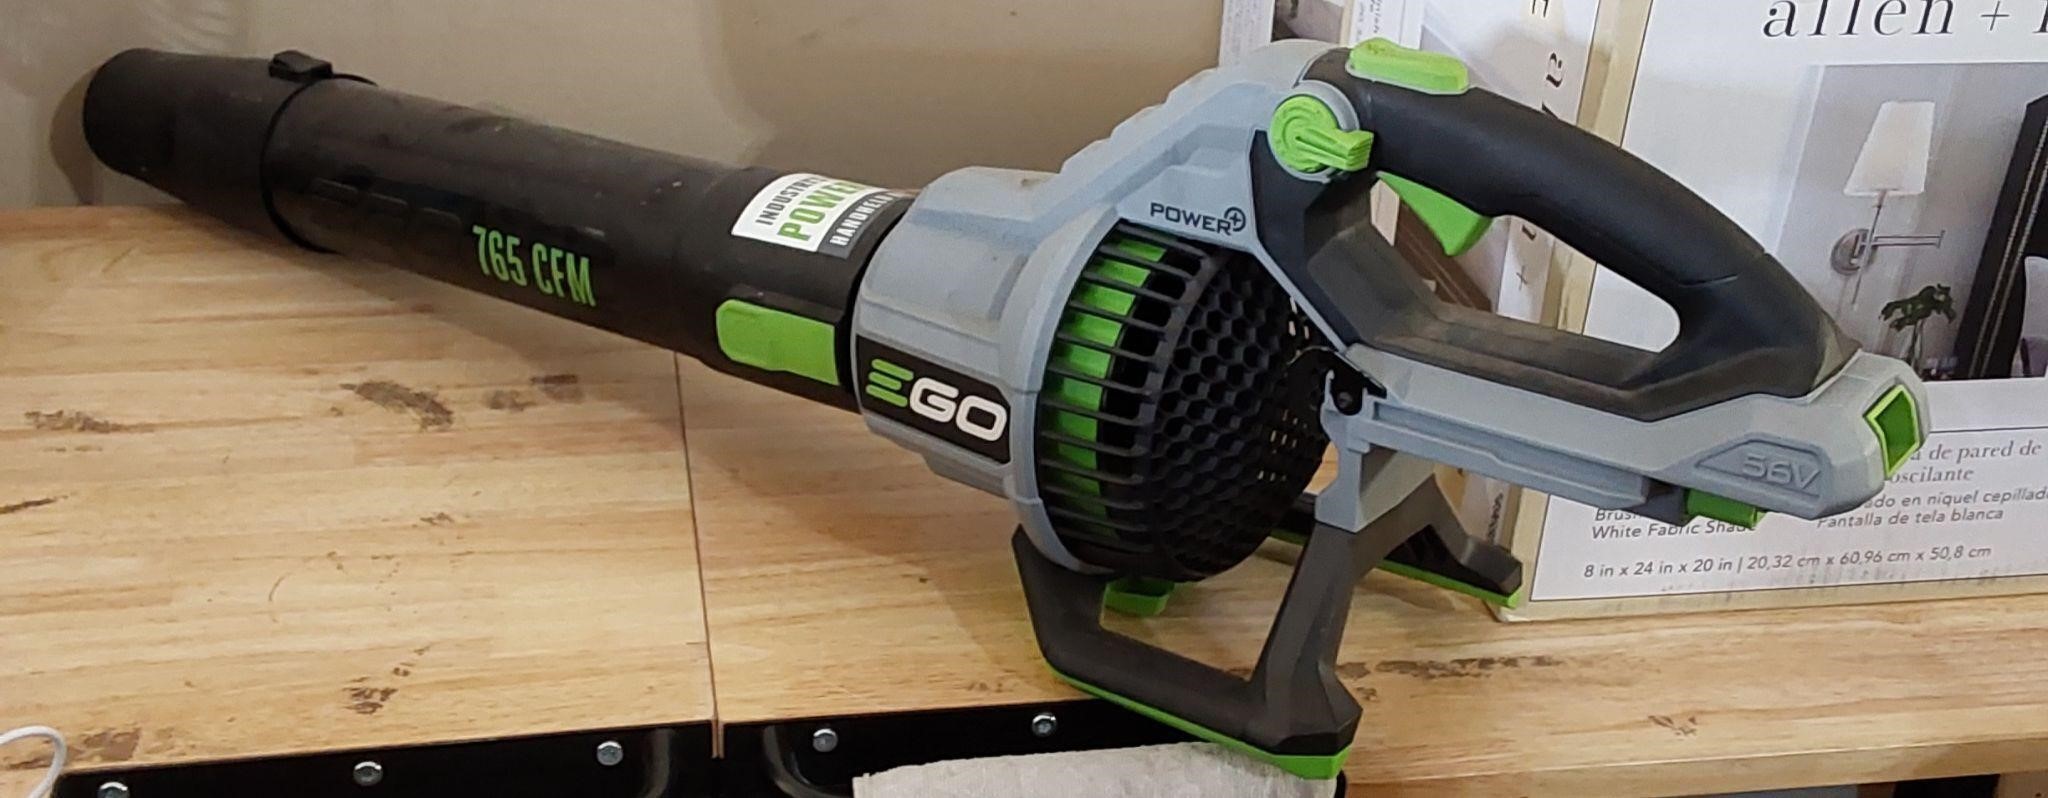 Ego NON WORKING 56v Leaf Bower TOOL ONLY